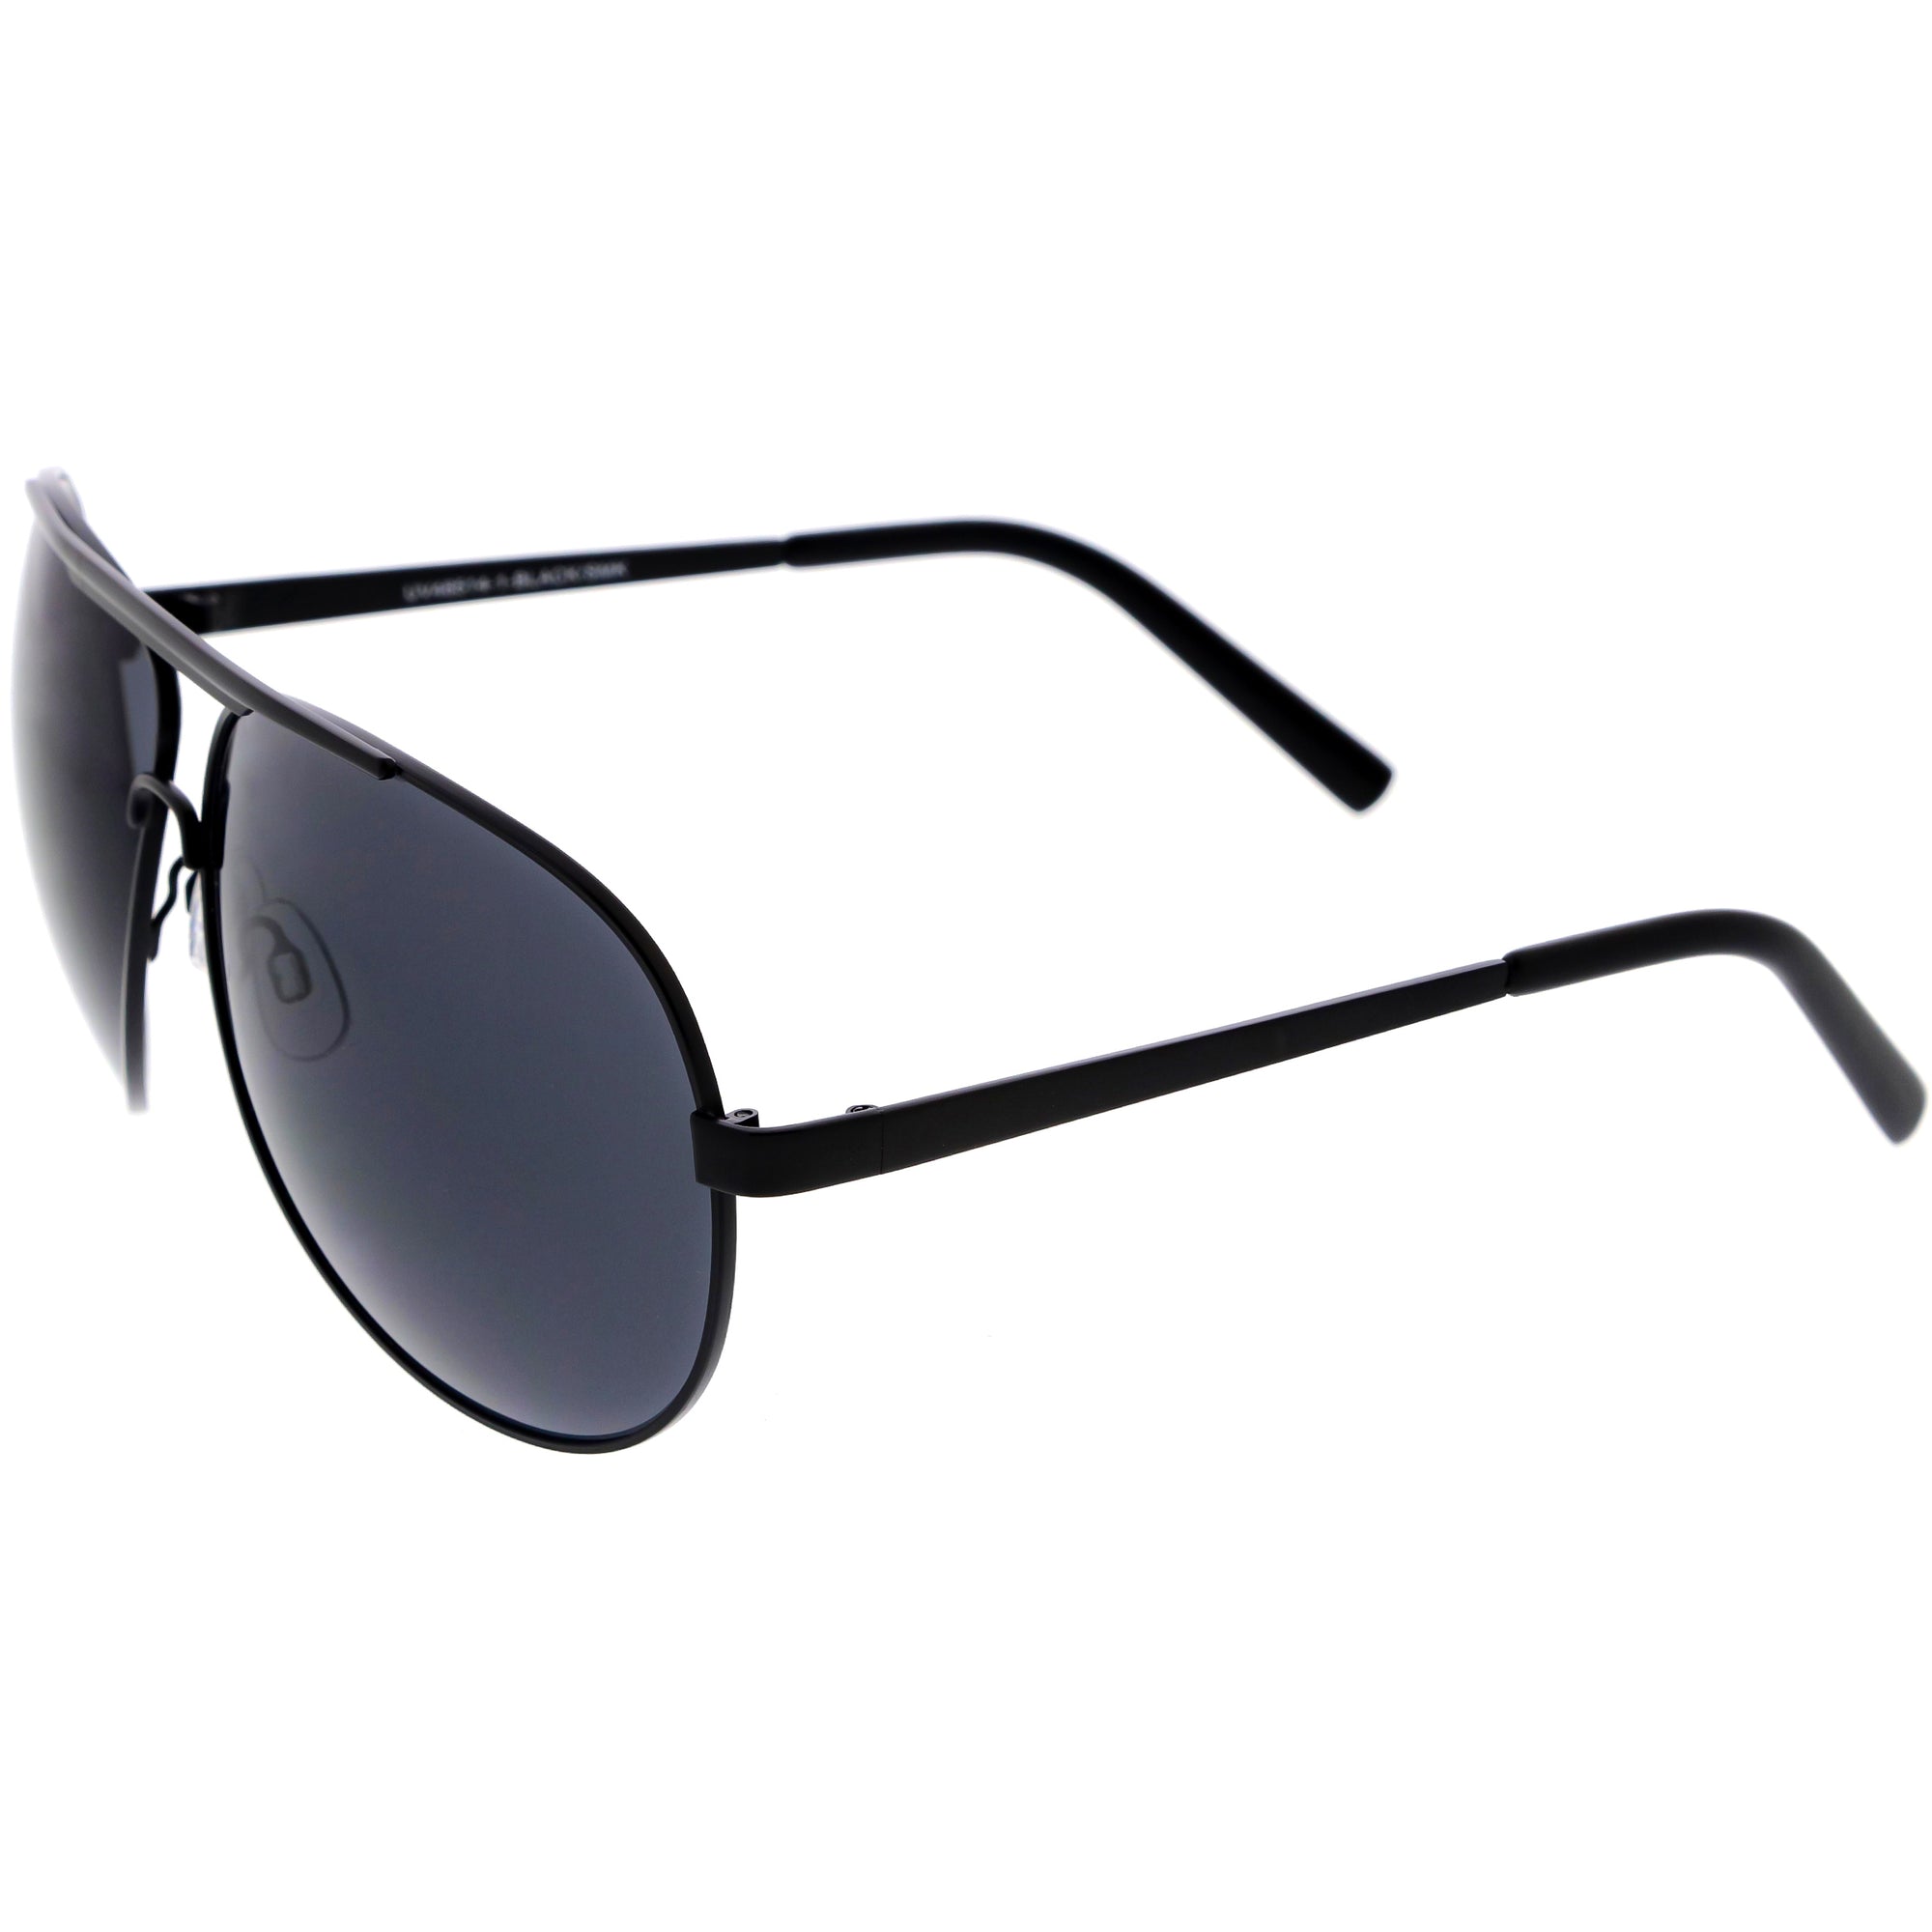 Extra wide frame mens sunglasses + FREE SHIPPING